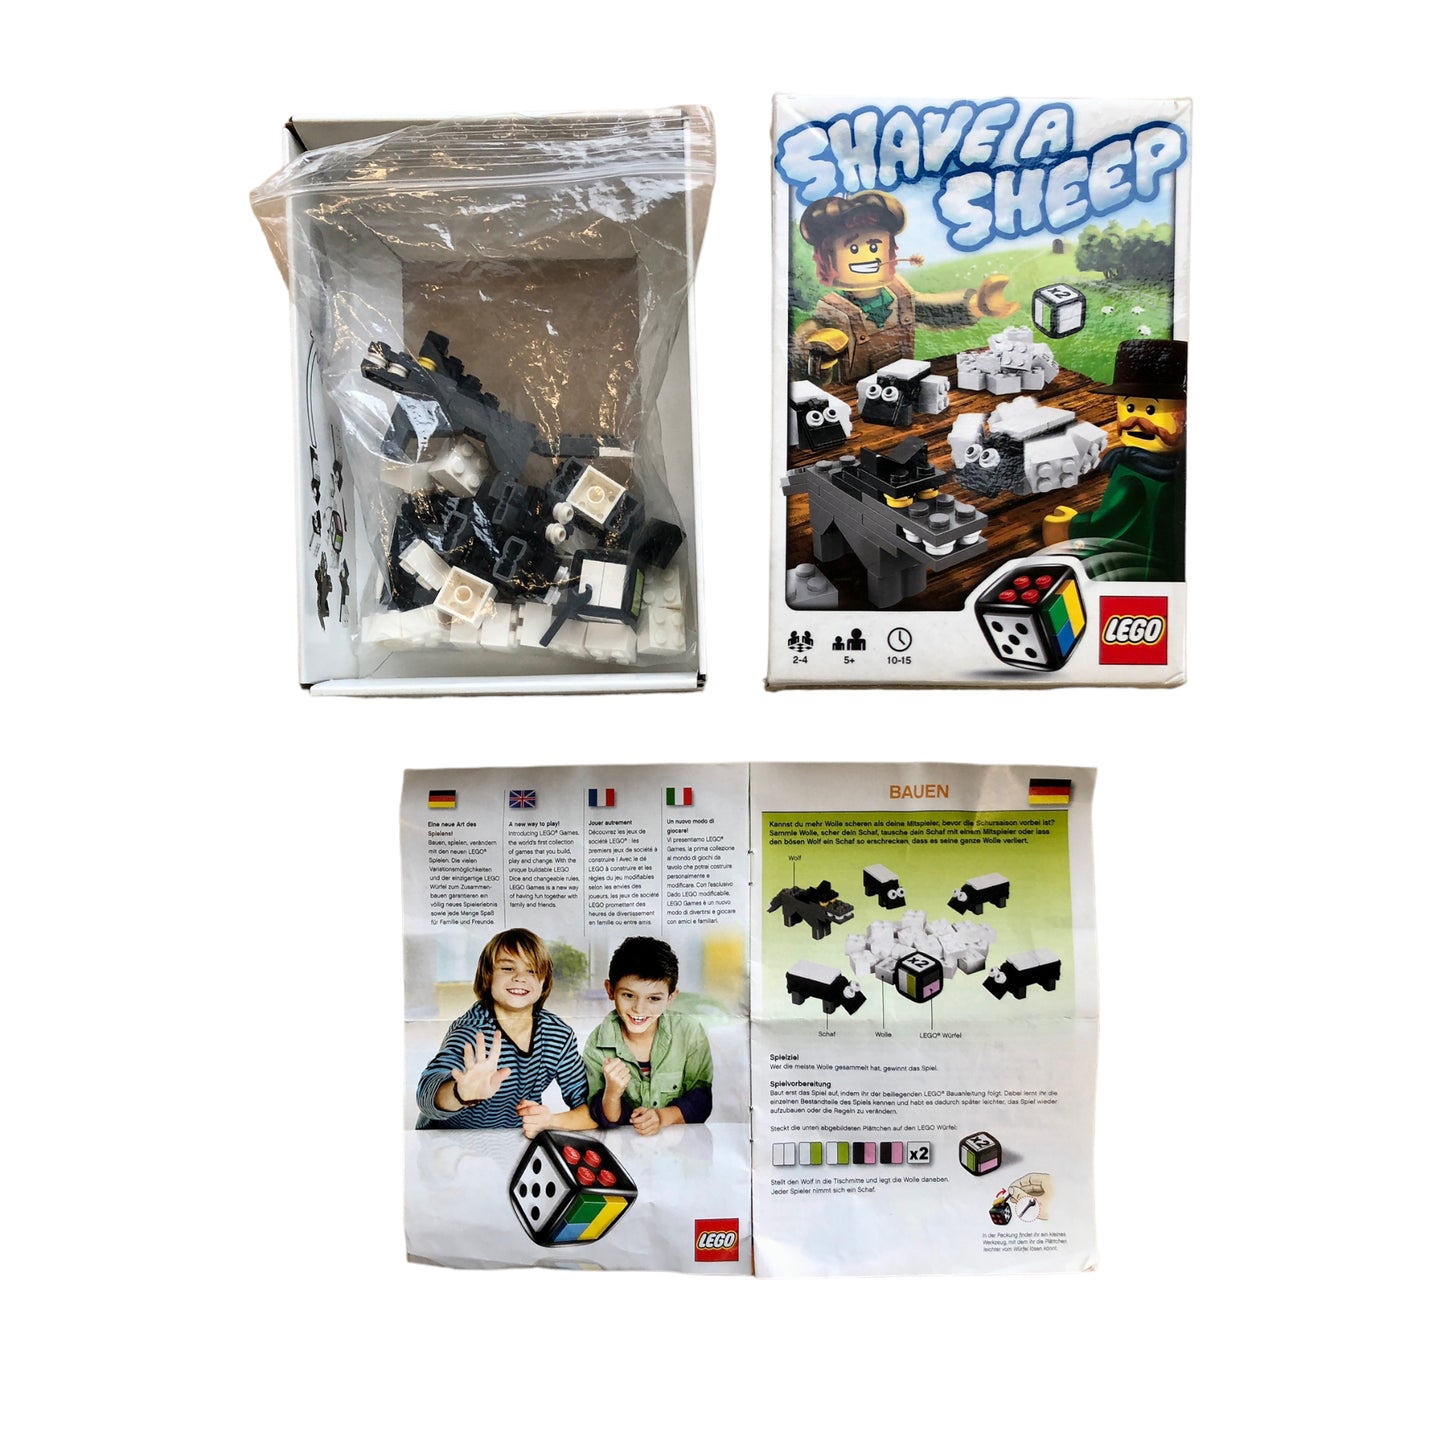 LEGO ® 3845 Shave a Sheep